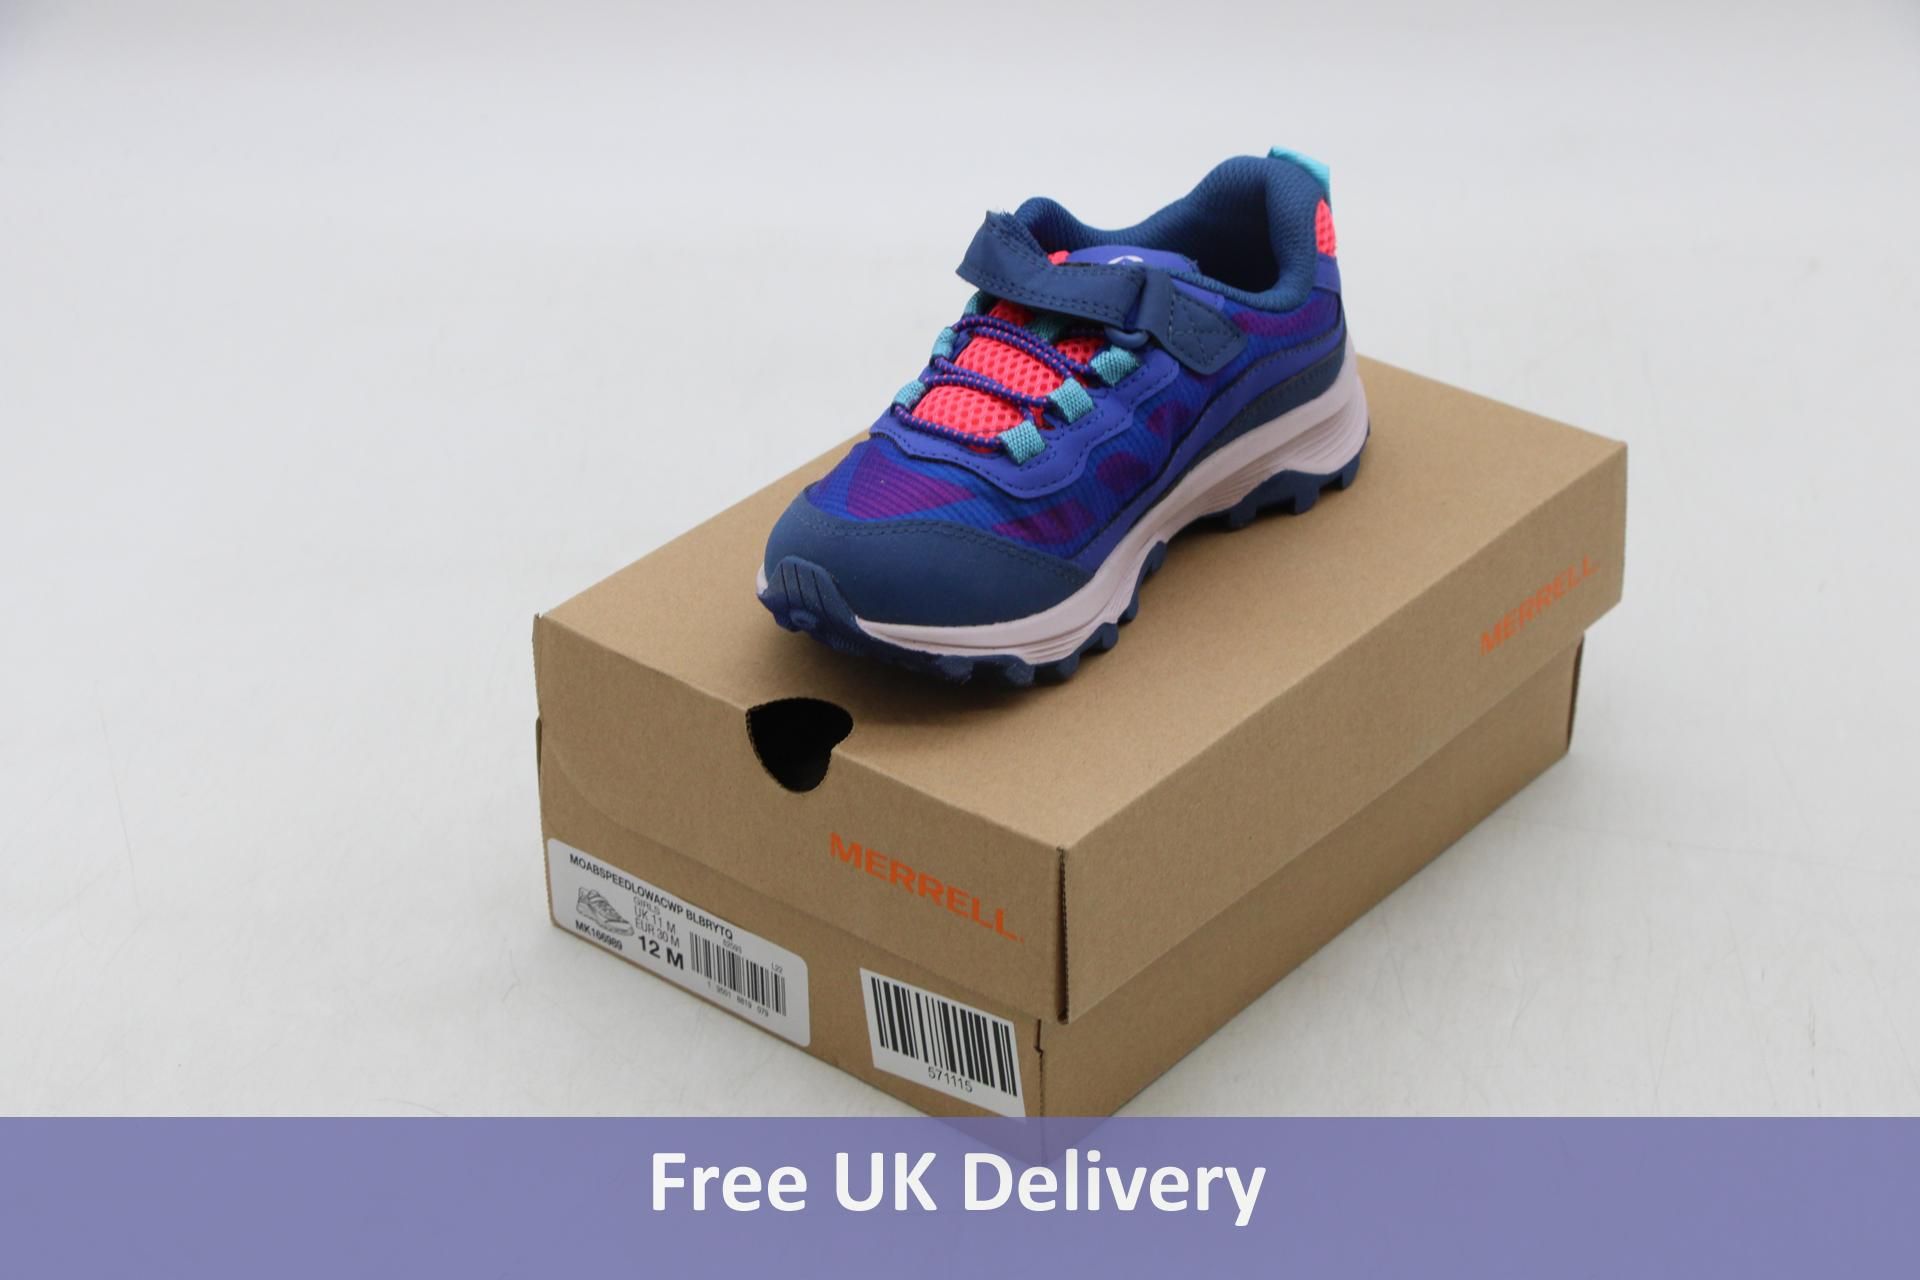 Merrell Moab Speed Low Girls Trainers, Blue/Purple, UK 11-12 Months